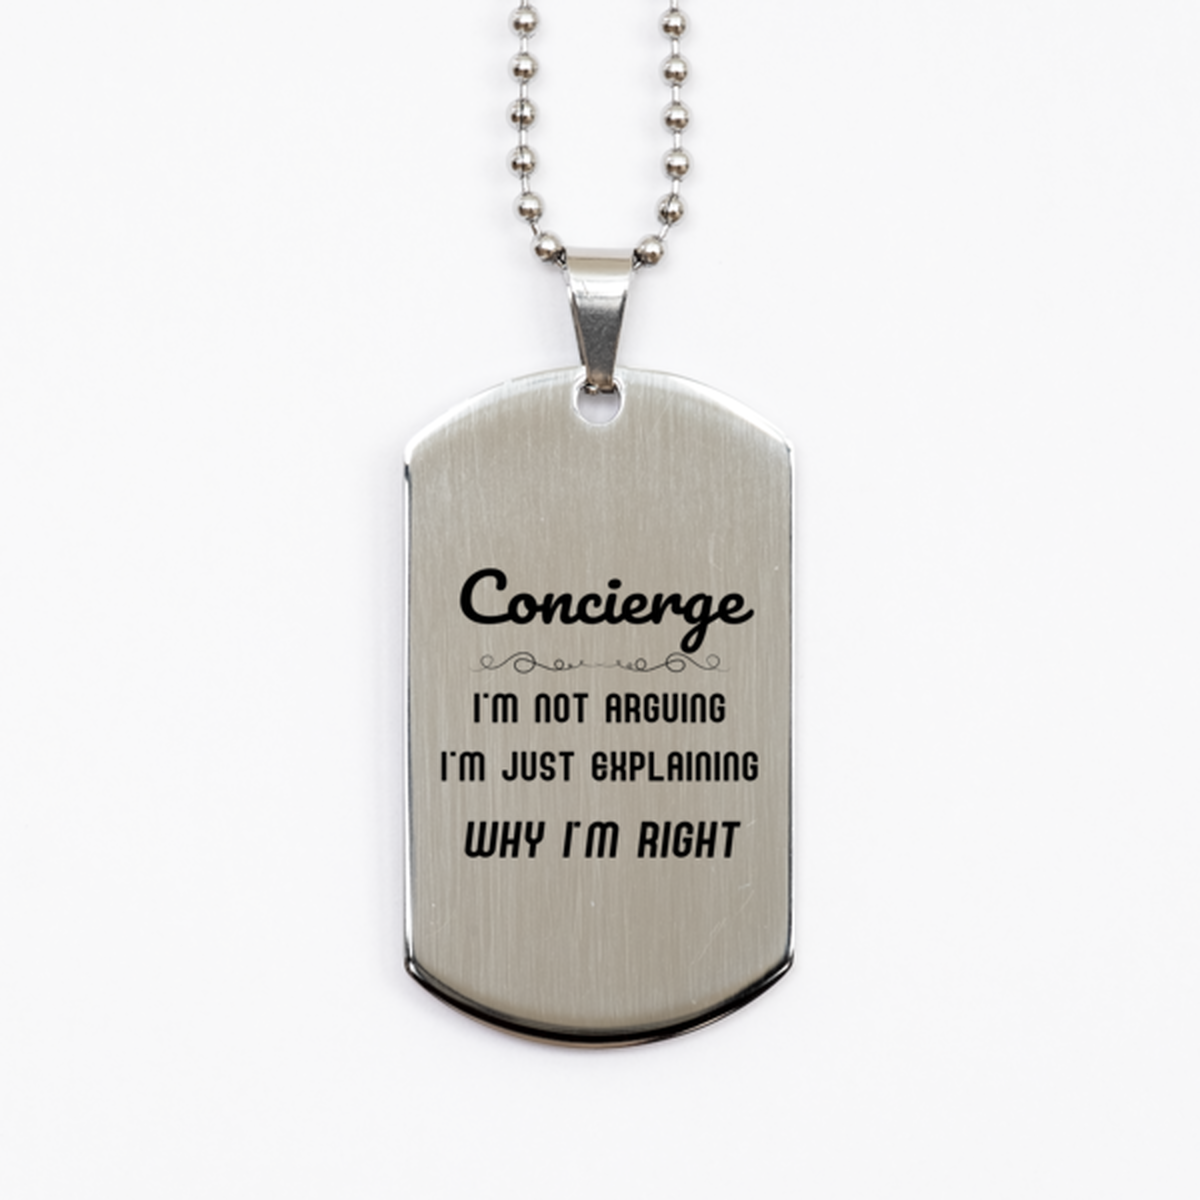 Concierge I'm not Arguing. I'm Just Explaining Why I'm RIGHT Silver Dog Tag, Funny Saying Quote Concierge Gifts For Concierge Graduation Birthday Christmas Gifts for Men Women Coworker